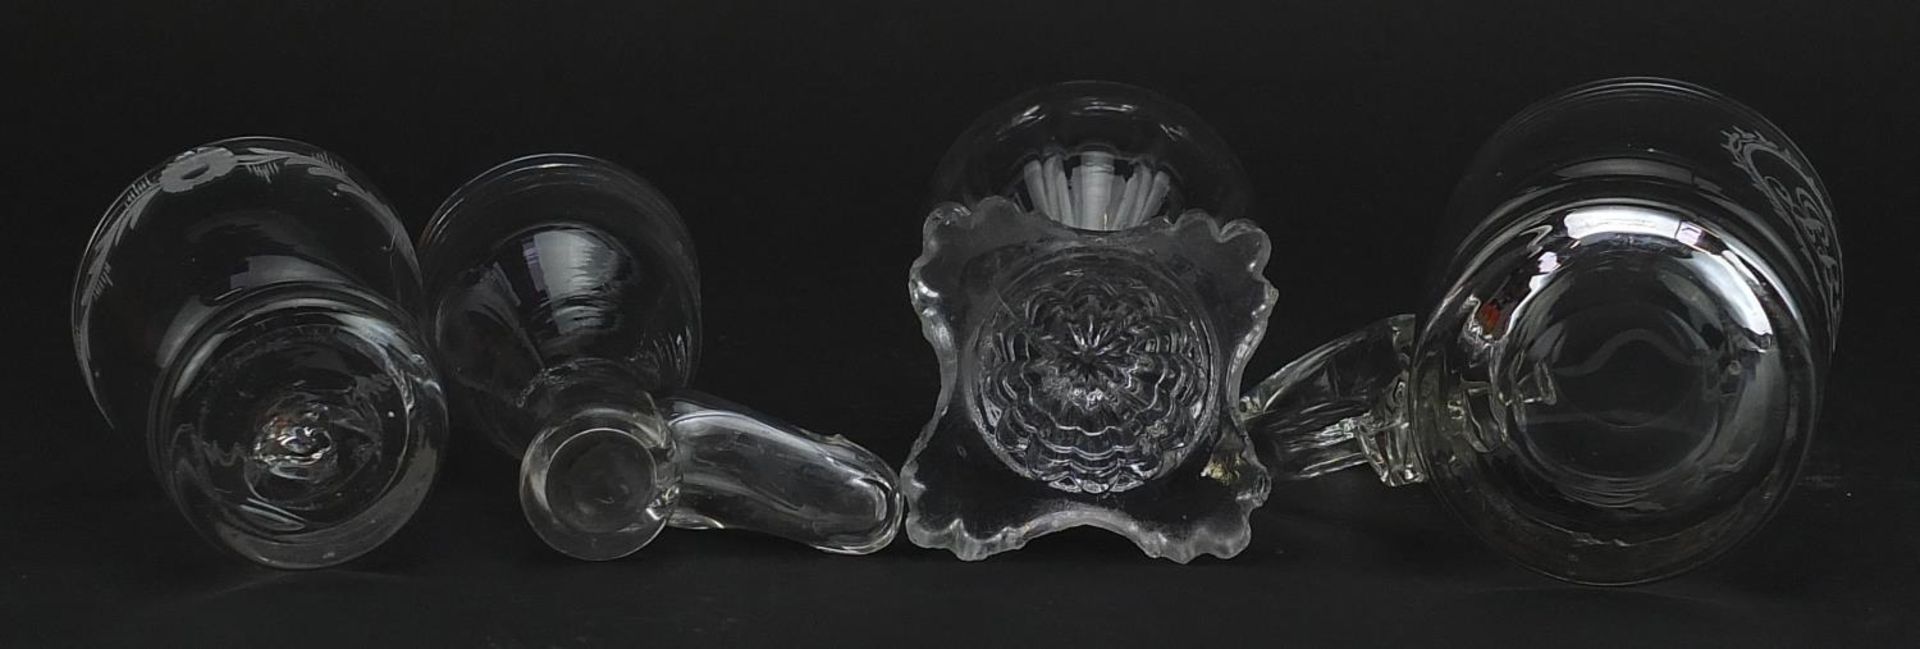 Four 18th century glasses including a stirrup cup and handled cup with engraved initials, the - Image 3 of 3